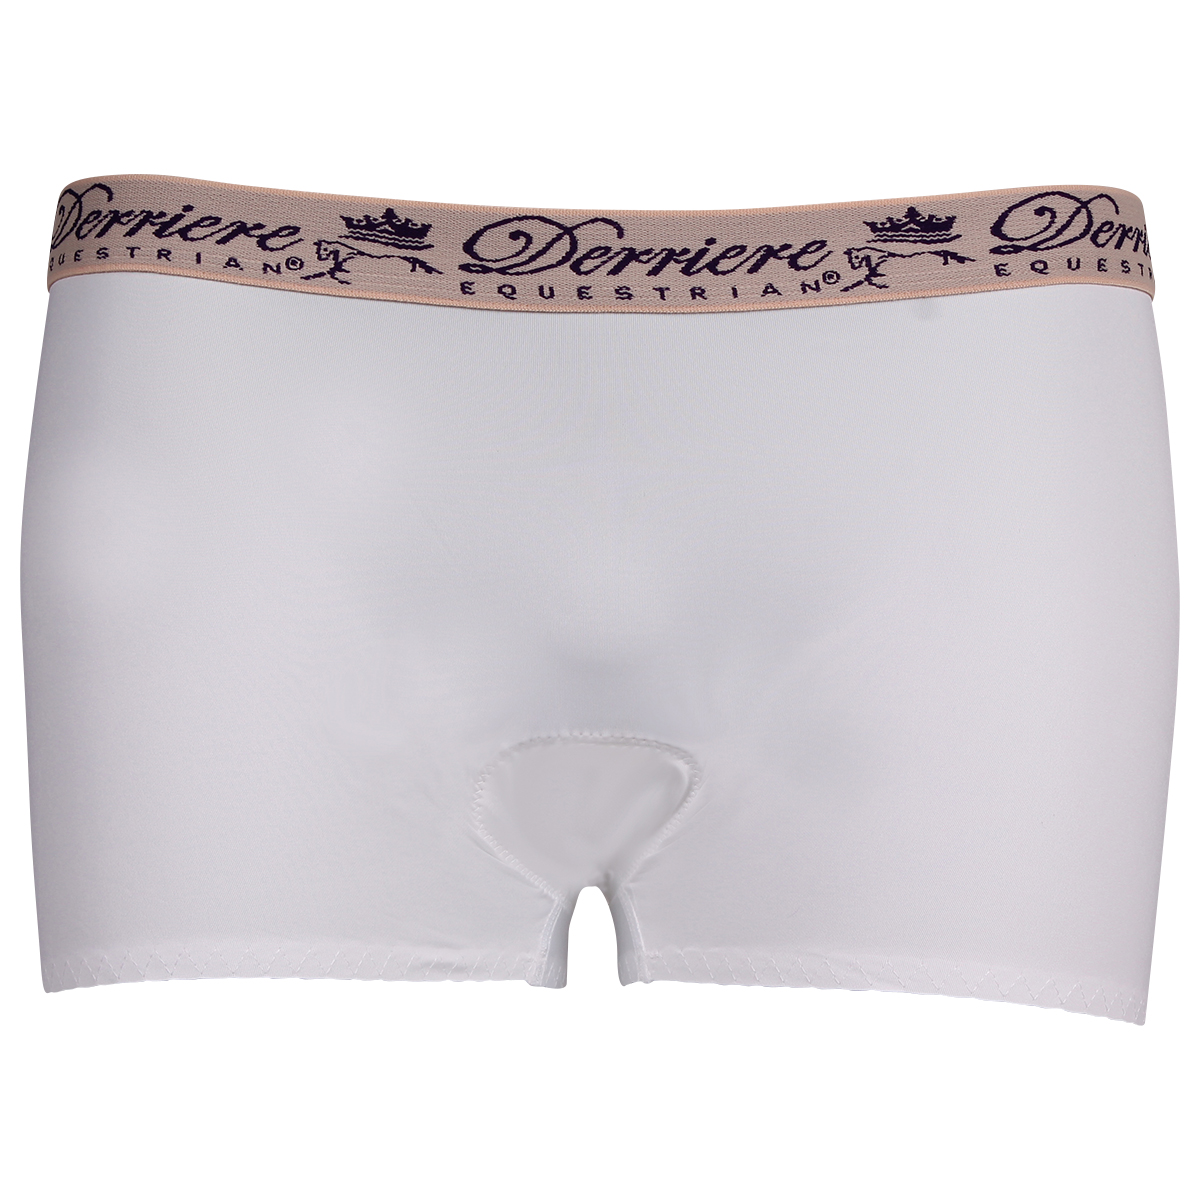 Shorty Derriere Equestrian Padded Female Wit, L in wit